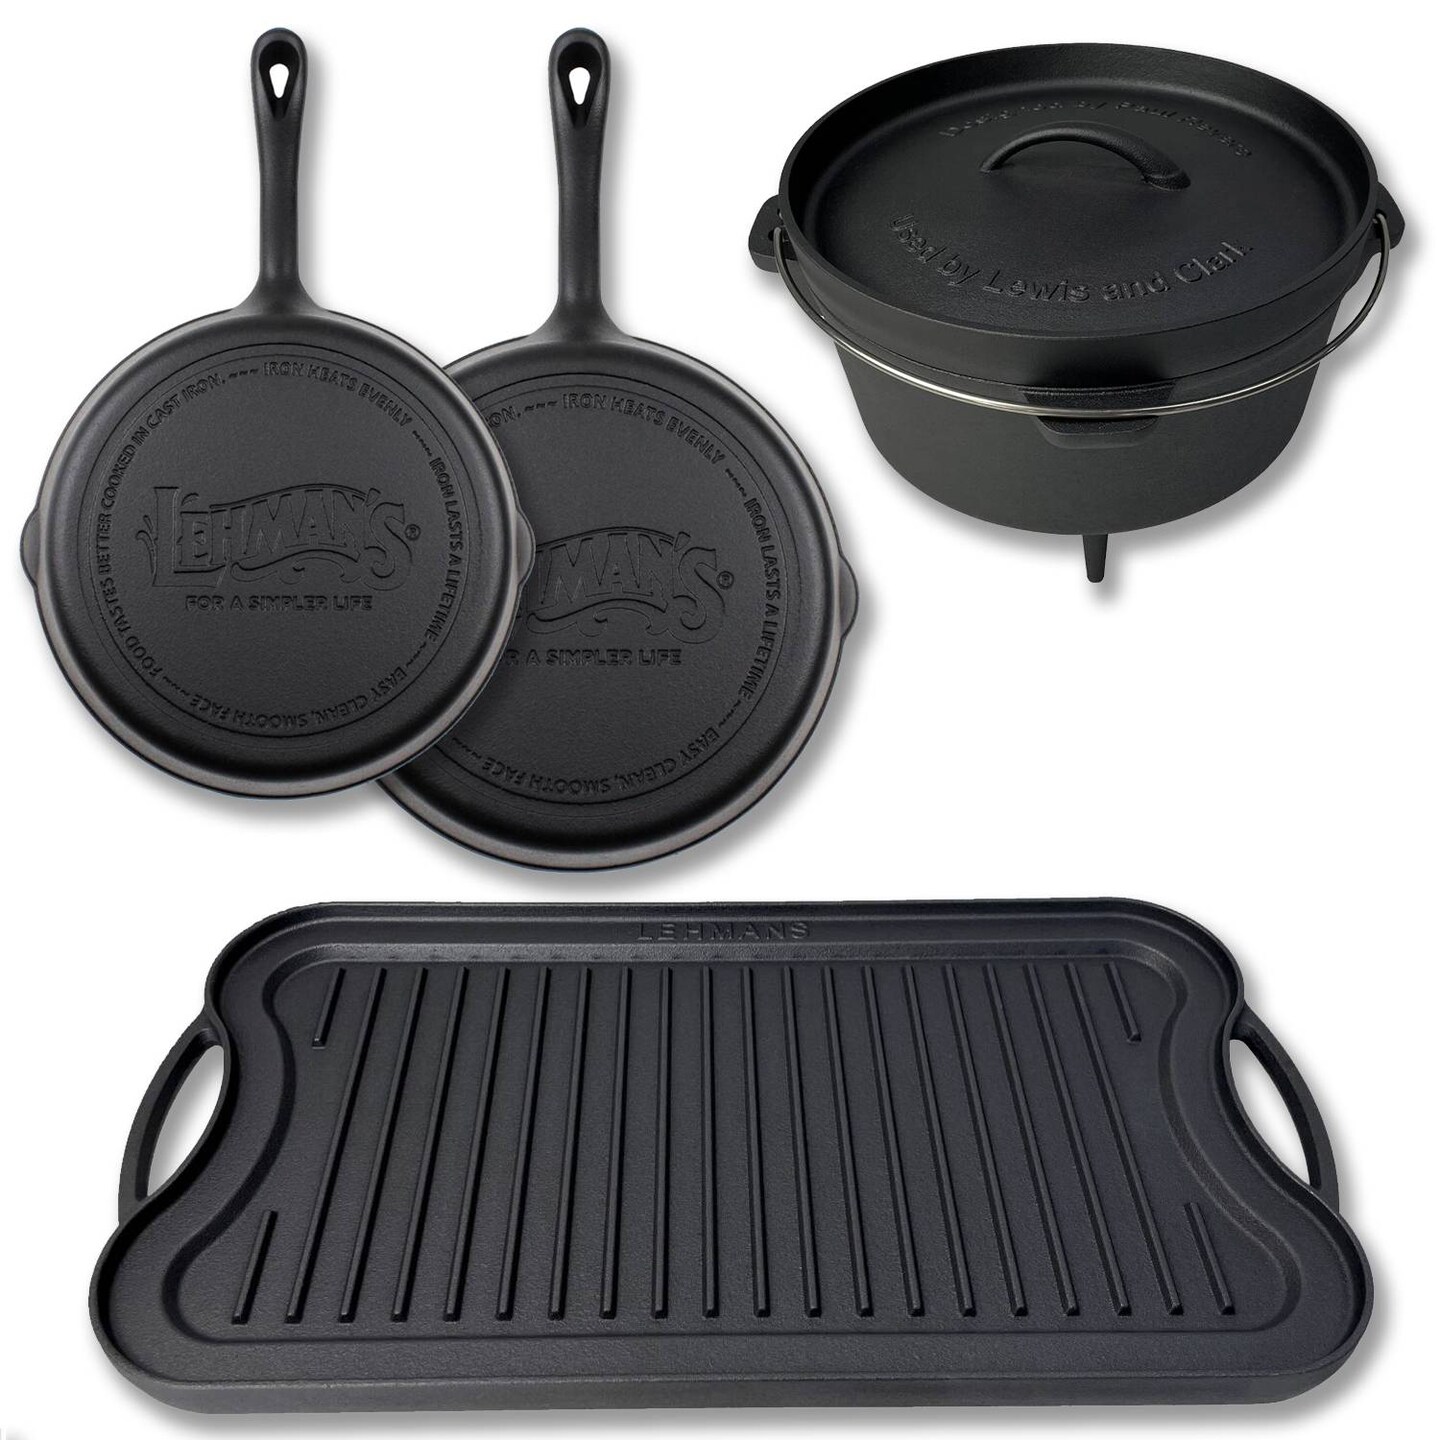 Lehman's Campfire Cooking 4-Piece Set, Nitrided, Dutch Oven, Skillets, and Griddle, Size: One size, Black